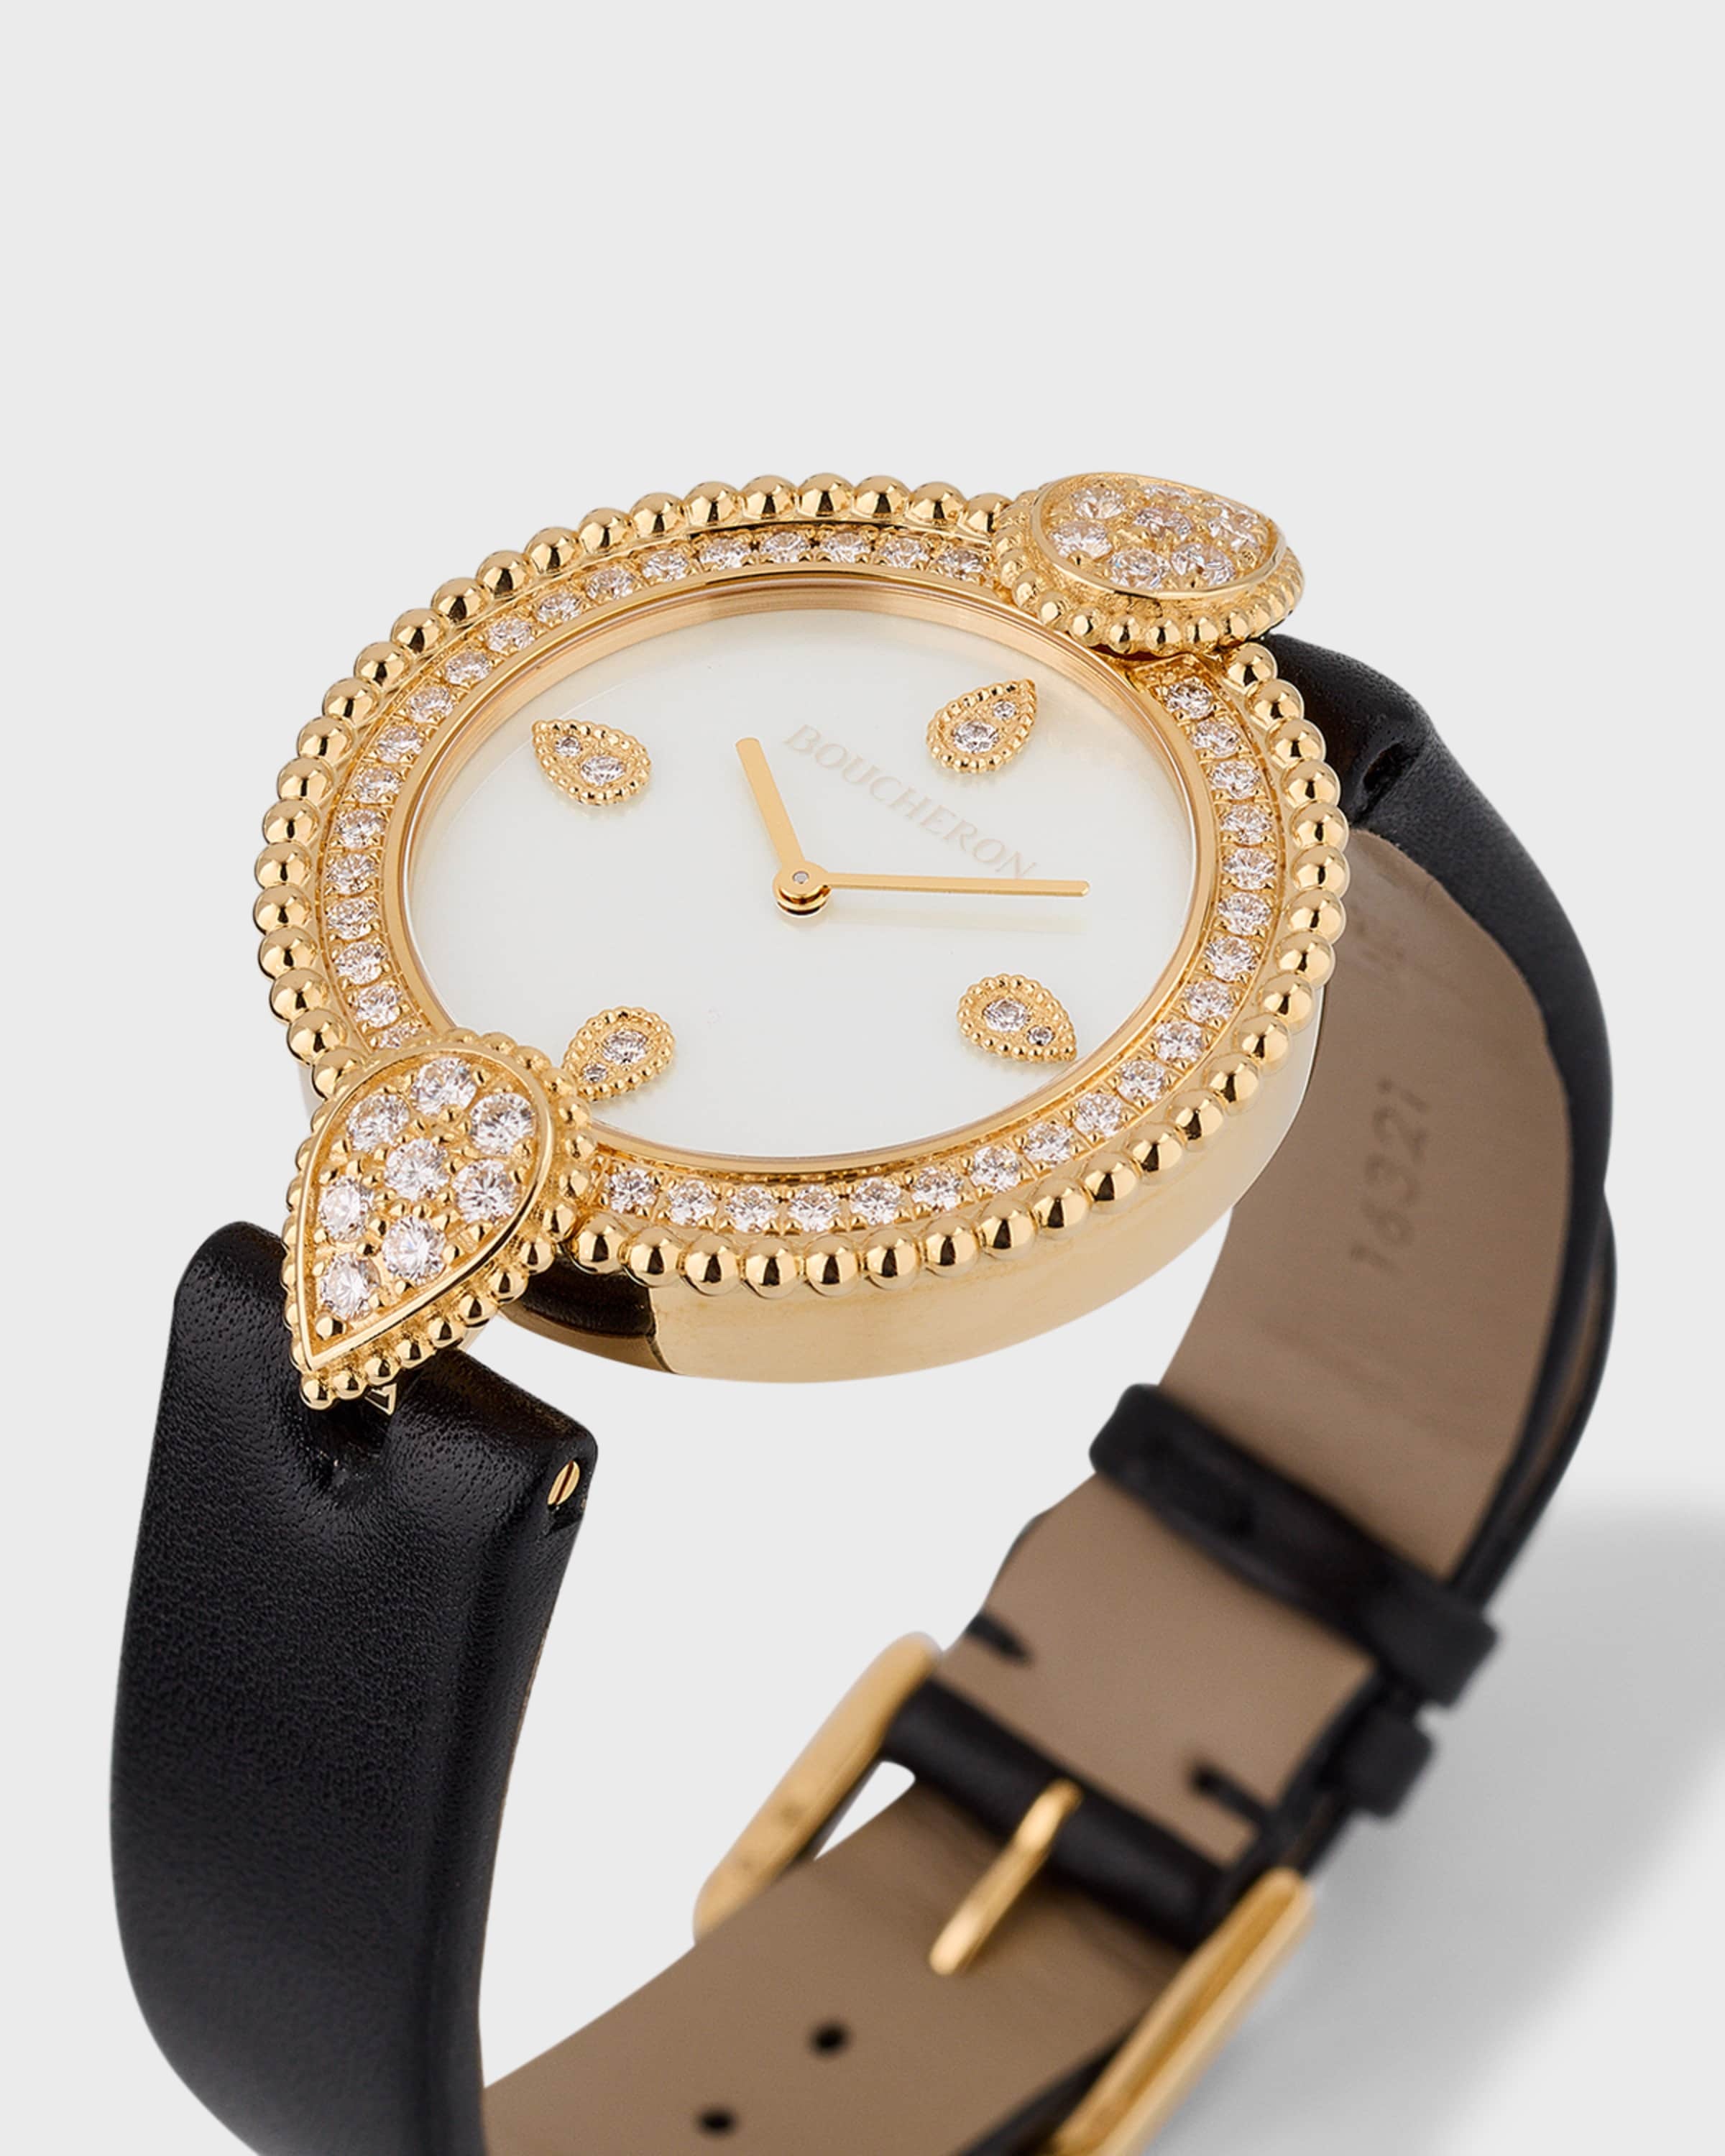 Serpent Boheme 18K Yellow Gold Watch with Diamonds and Mother of Pearl - 4